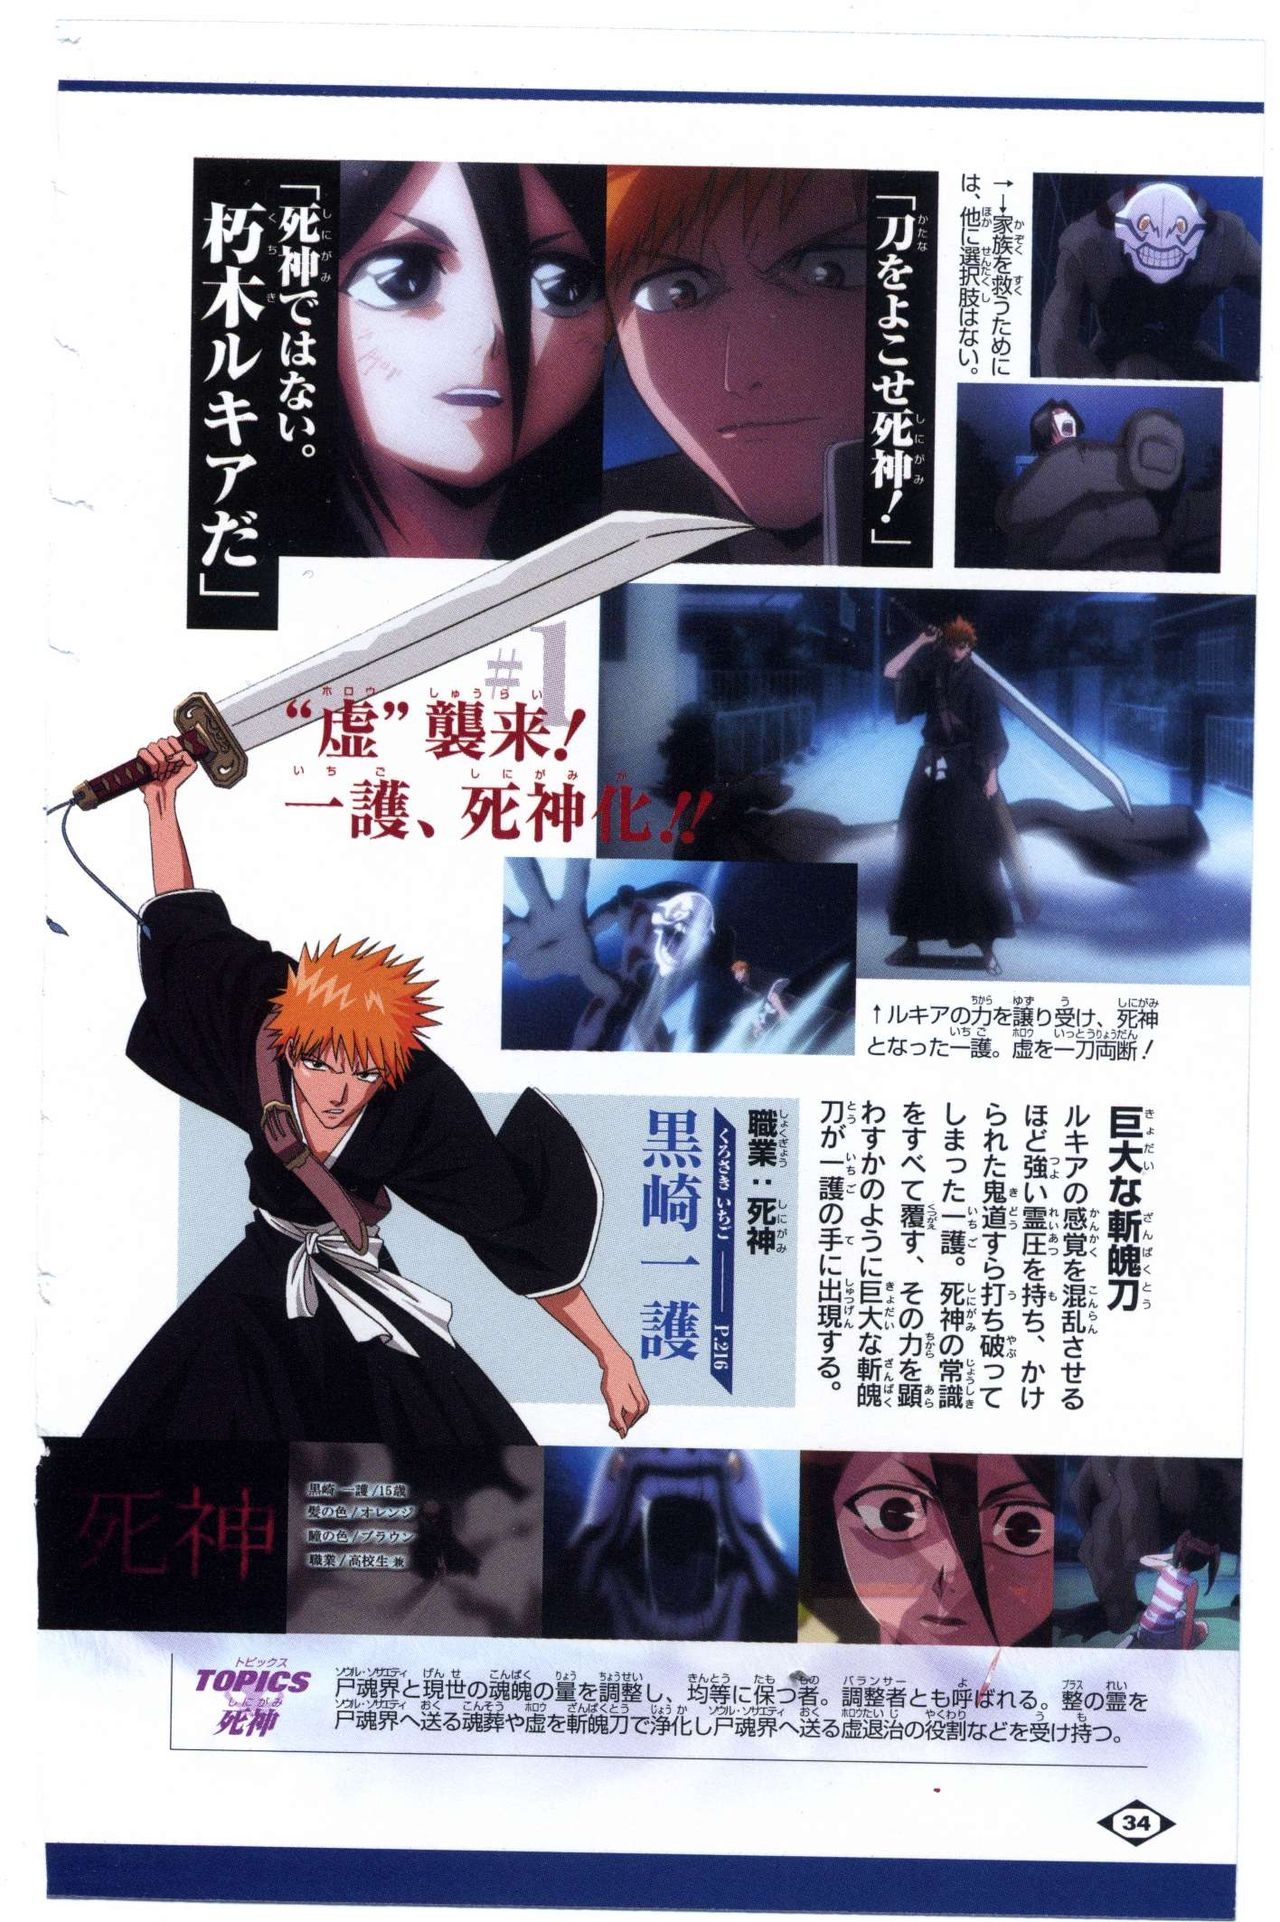 Bleach: Official Animation Book VIBEs 34